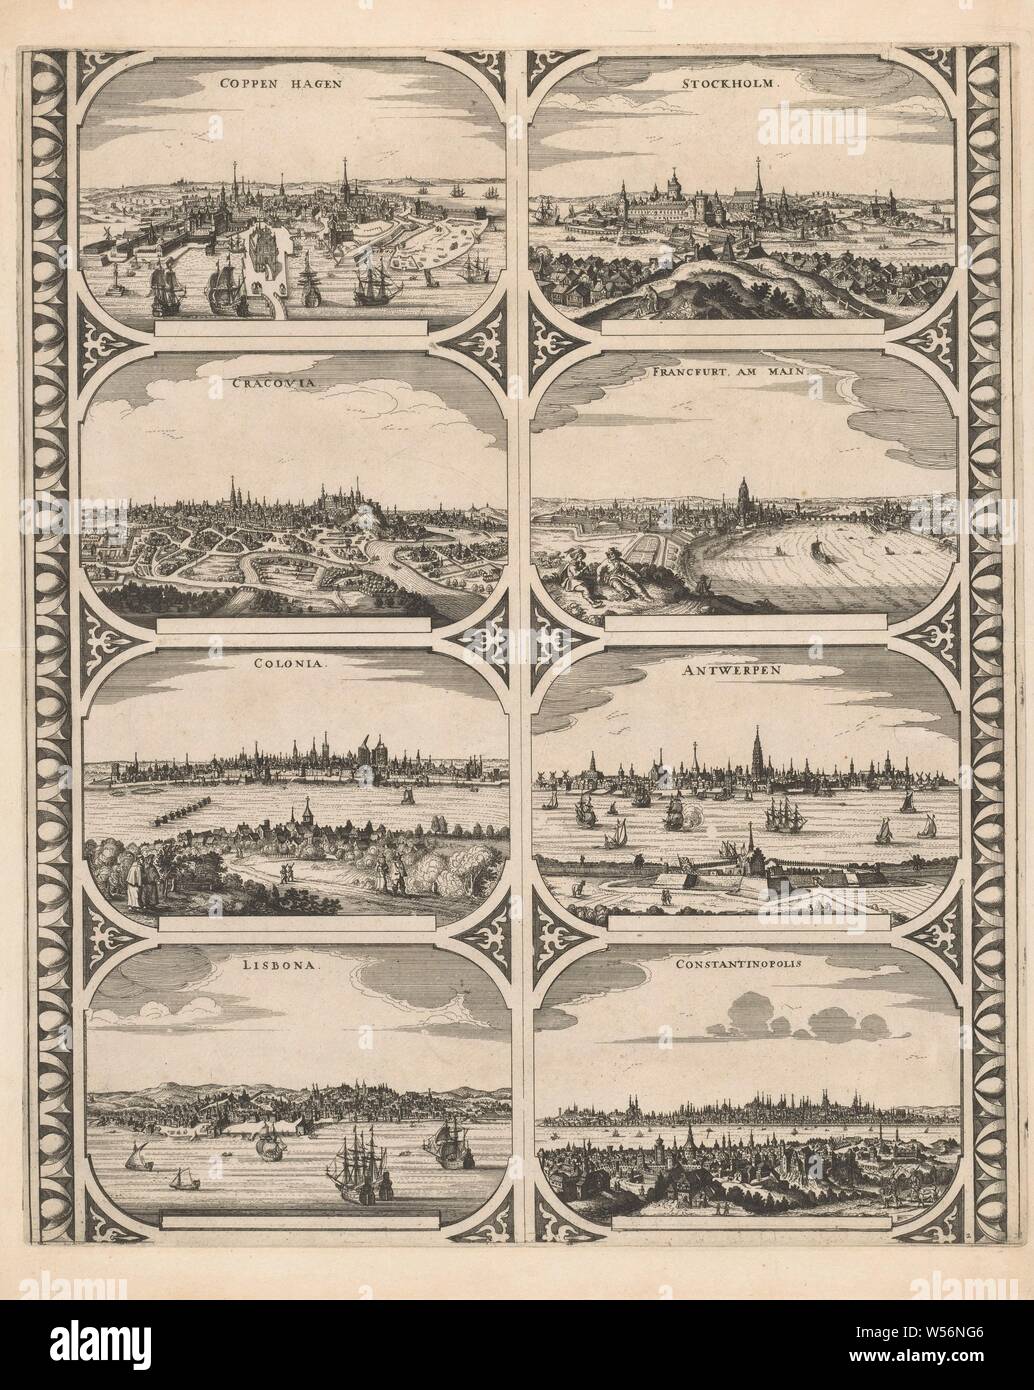 Coppen Hagen / Cracovia / Colonia / Lisbona / Stockholm / Francfurt am Main / Antwerp / Constantinopolis (title on object), Sheet with two vertical strips, each with four views of cities in Europe: Copenhagen, Krakow, Cologne, Lisbon, Stockholm, Frankfurt am Main, Antwerp and Constantinople. Numbered lower right: 2. Uncut sheet with eight peripheral figures intended to be glued into strips as a frame around a map of a continent, maps of cities, prospect of city, town panorama, silhouette of city, Copenhagen, Antwerp, Constantinople, anonymous, Amsterdam, 1670 - 1672, paper, etching, h 512 mm Stock Photo